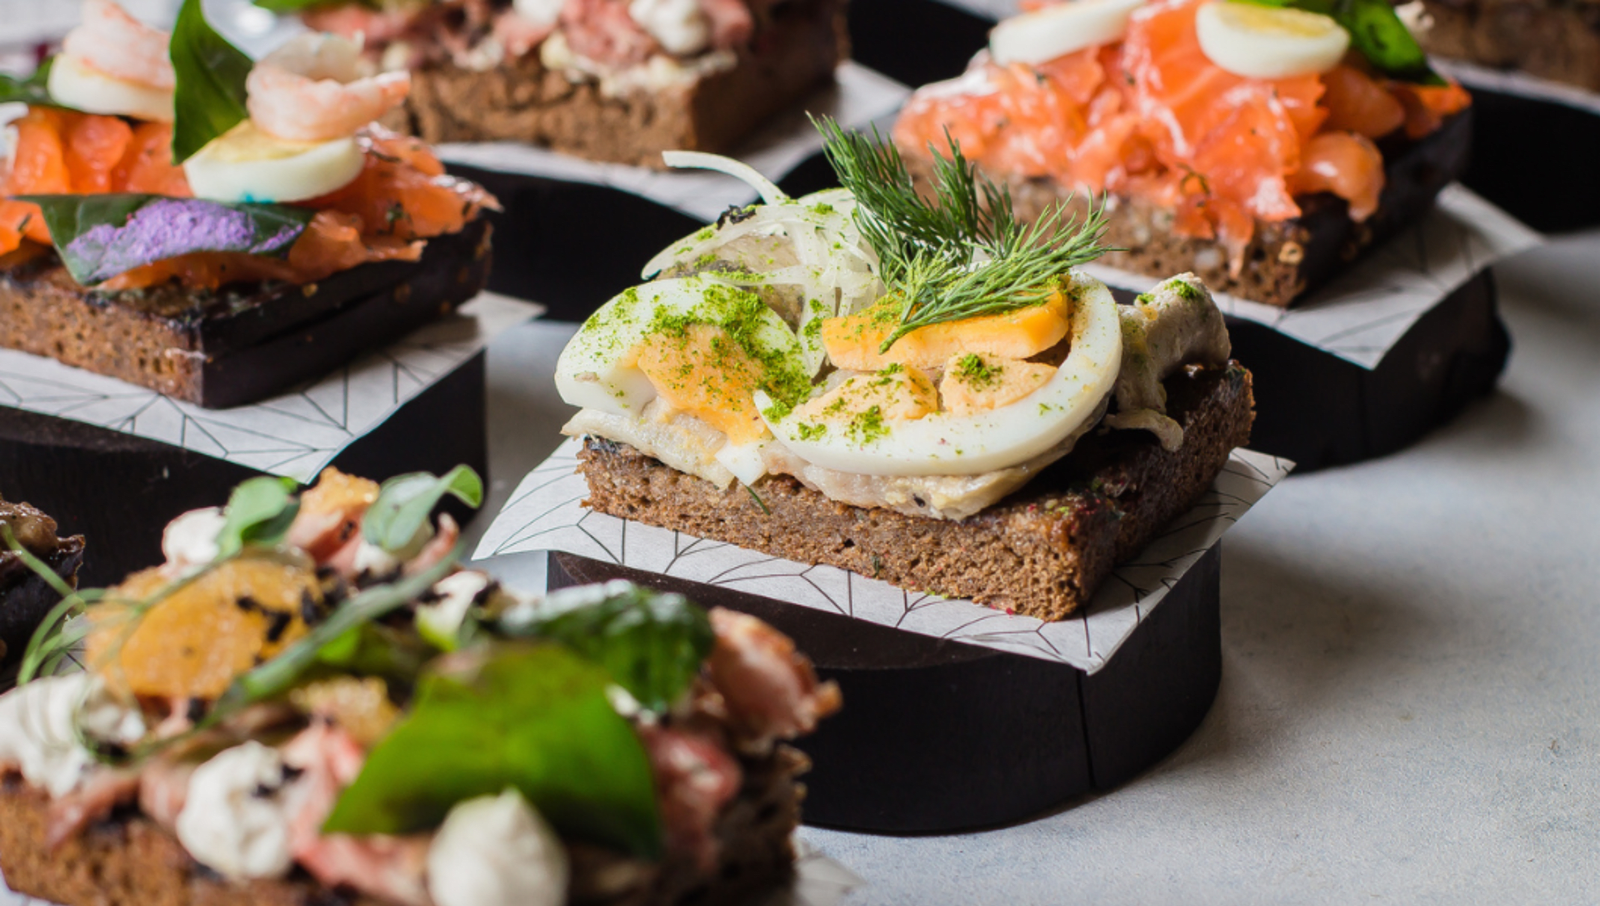 Open style sandwiches lined up sitting on tall wooden plates